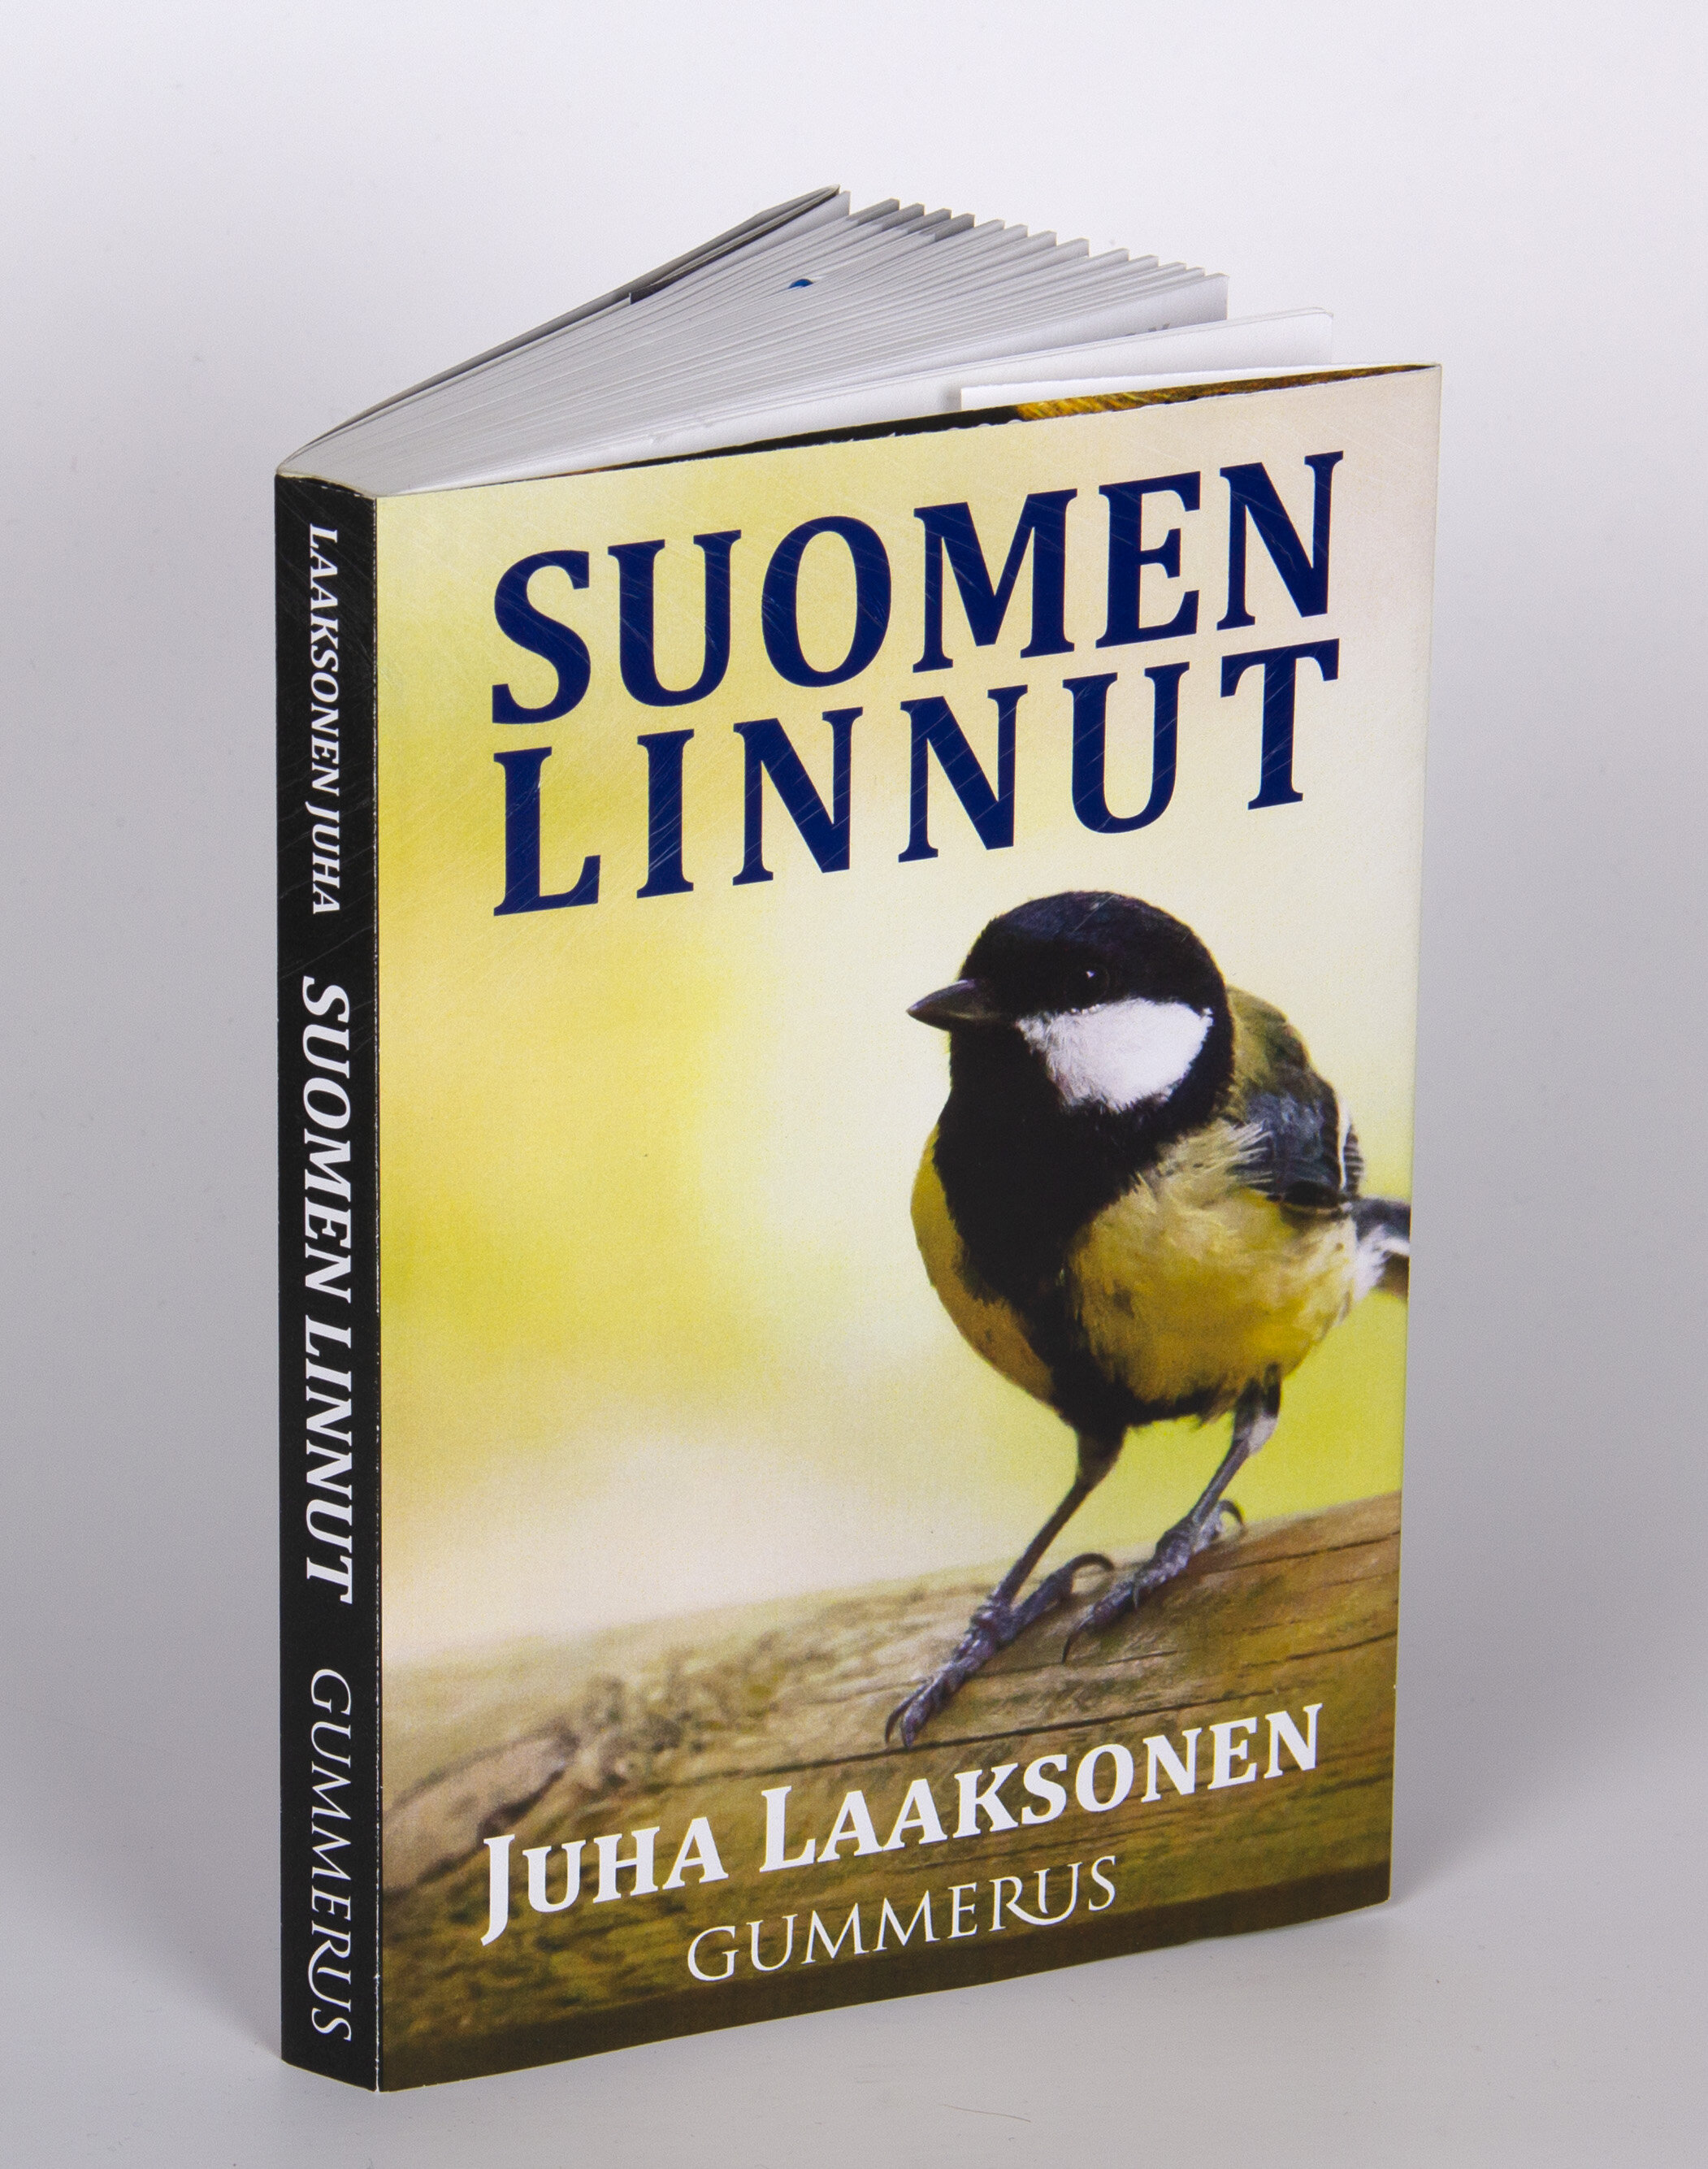  Front cover of a practice work, where we were tasked with redesigning the covers for a bird book with appropriate imagery. In addition, the taking of product photos was also practiced.  This was  NOT  an official design for the publisher Gummerus or